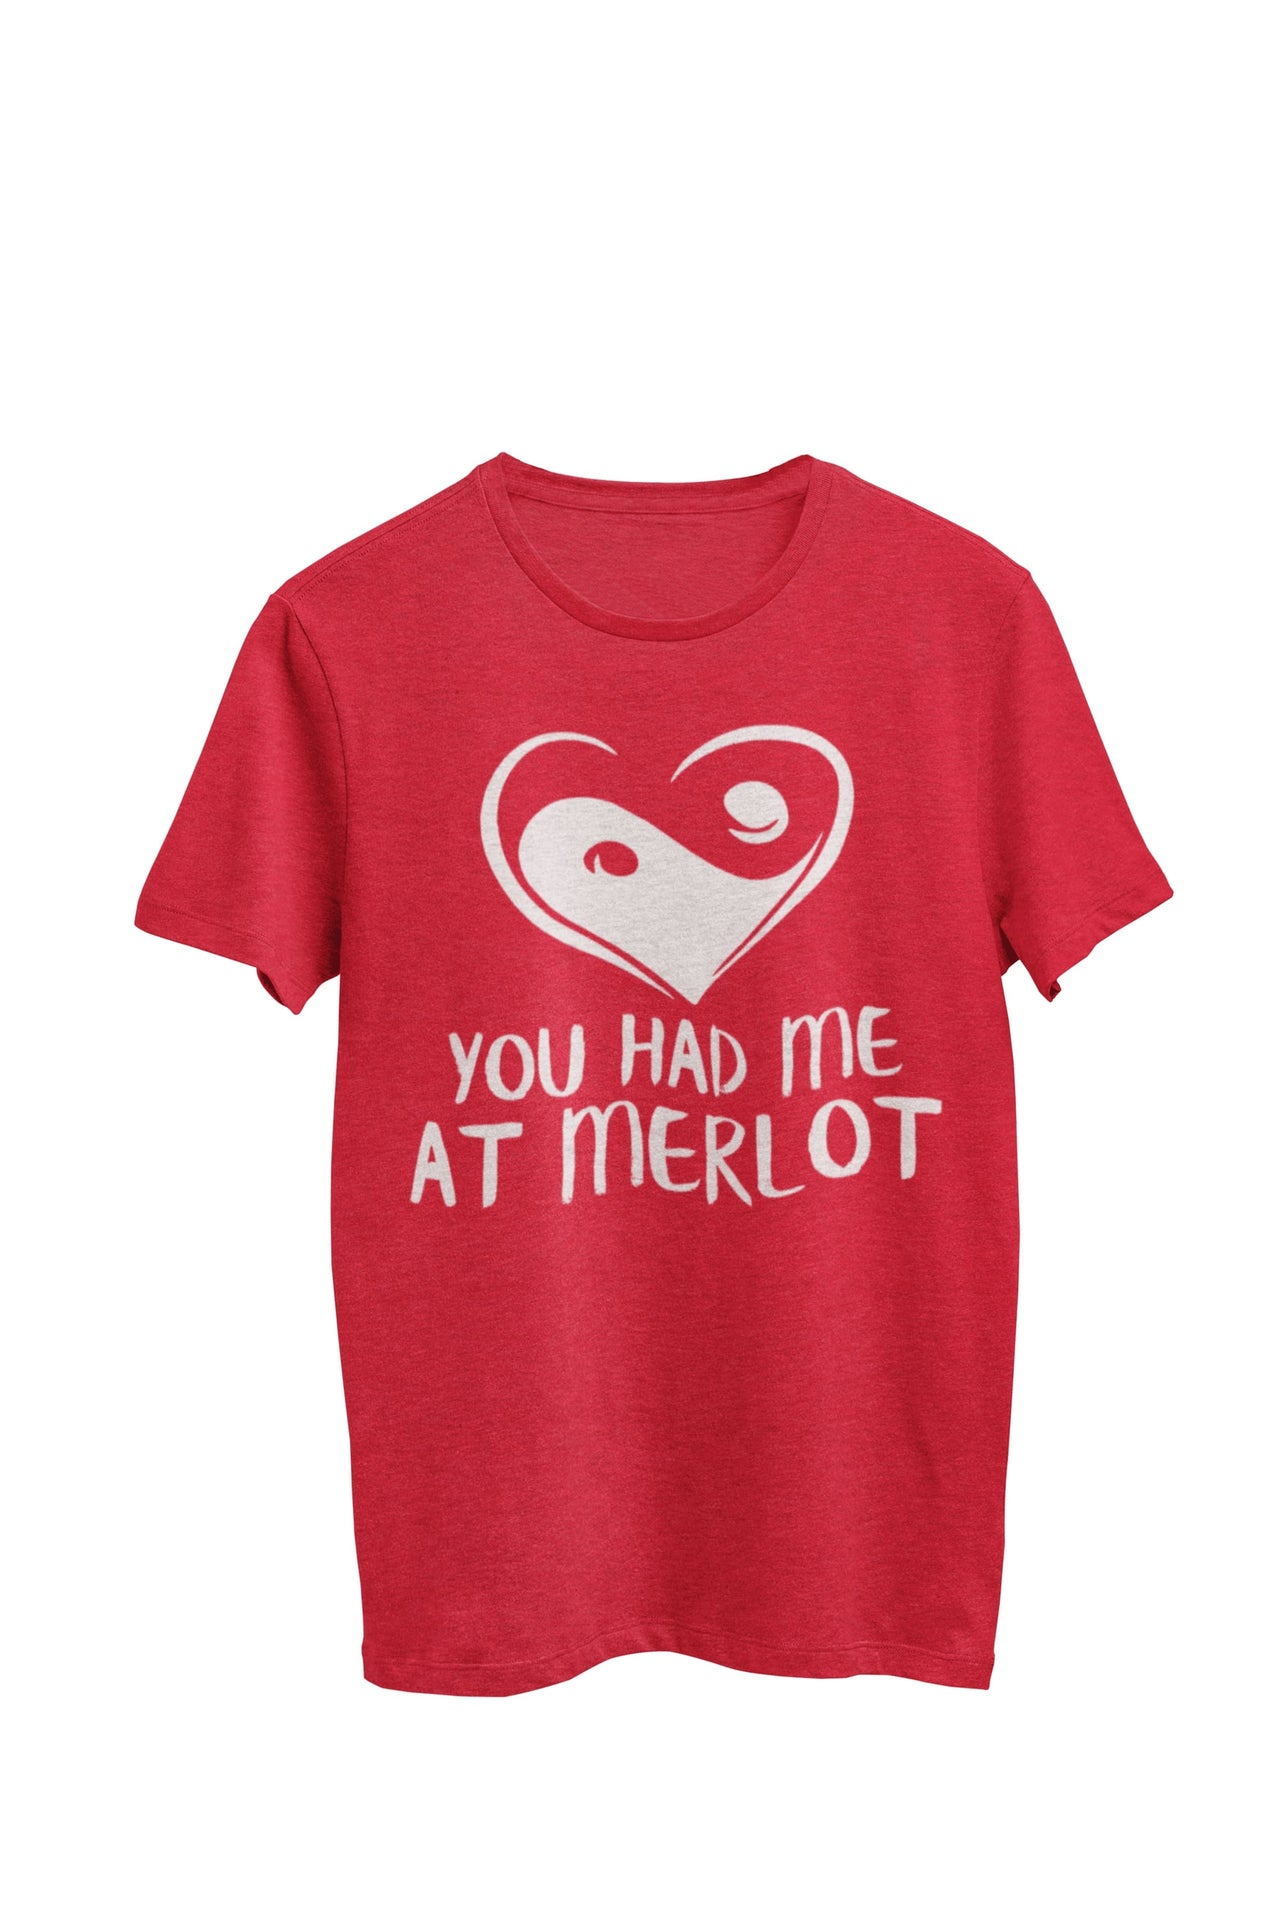 Heather Red Unisex T-Shirt with heart yin yang symbol and text 'you had me at merlot,' designed by WooHoo Apparel."